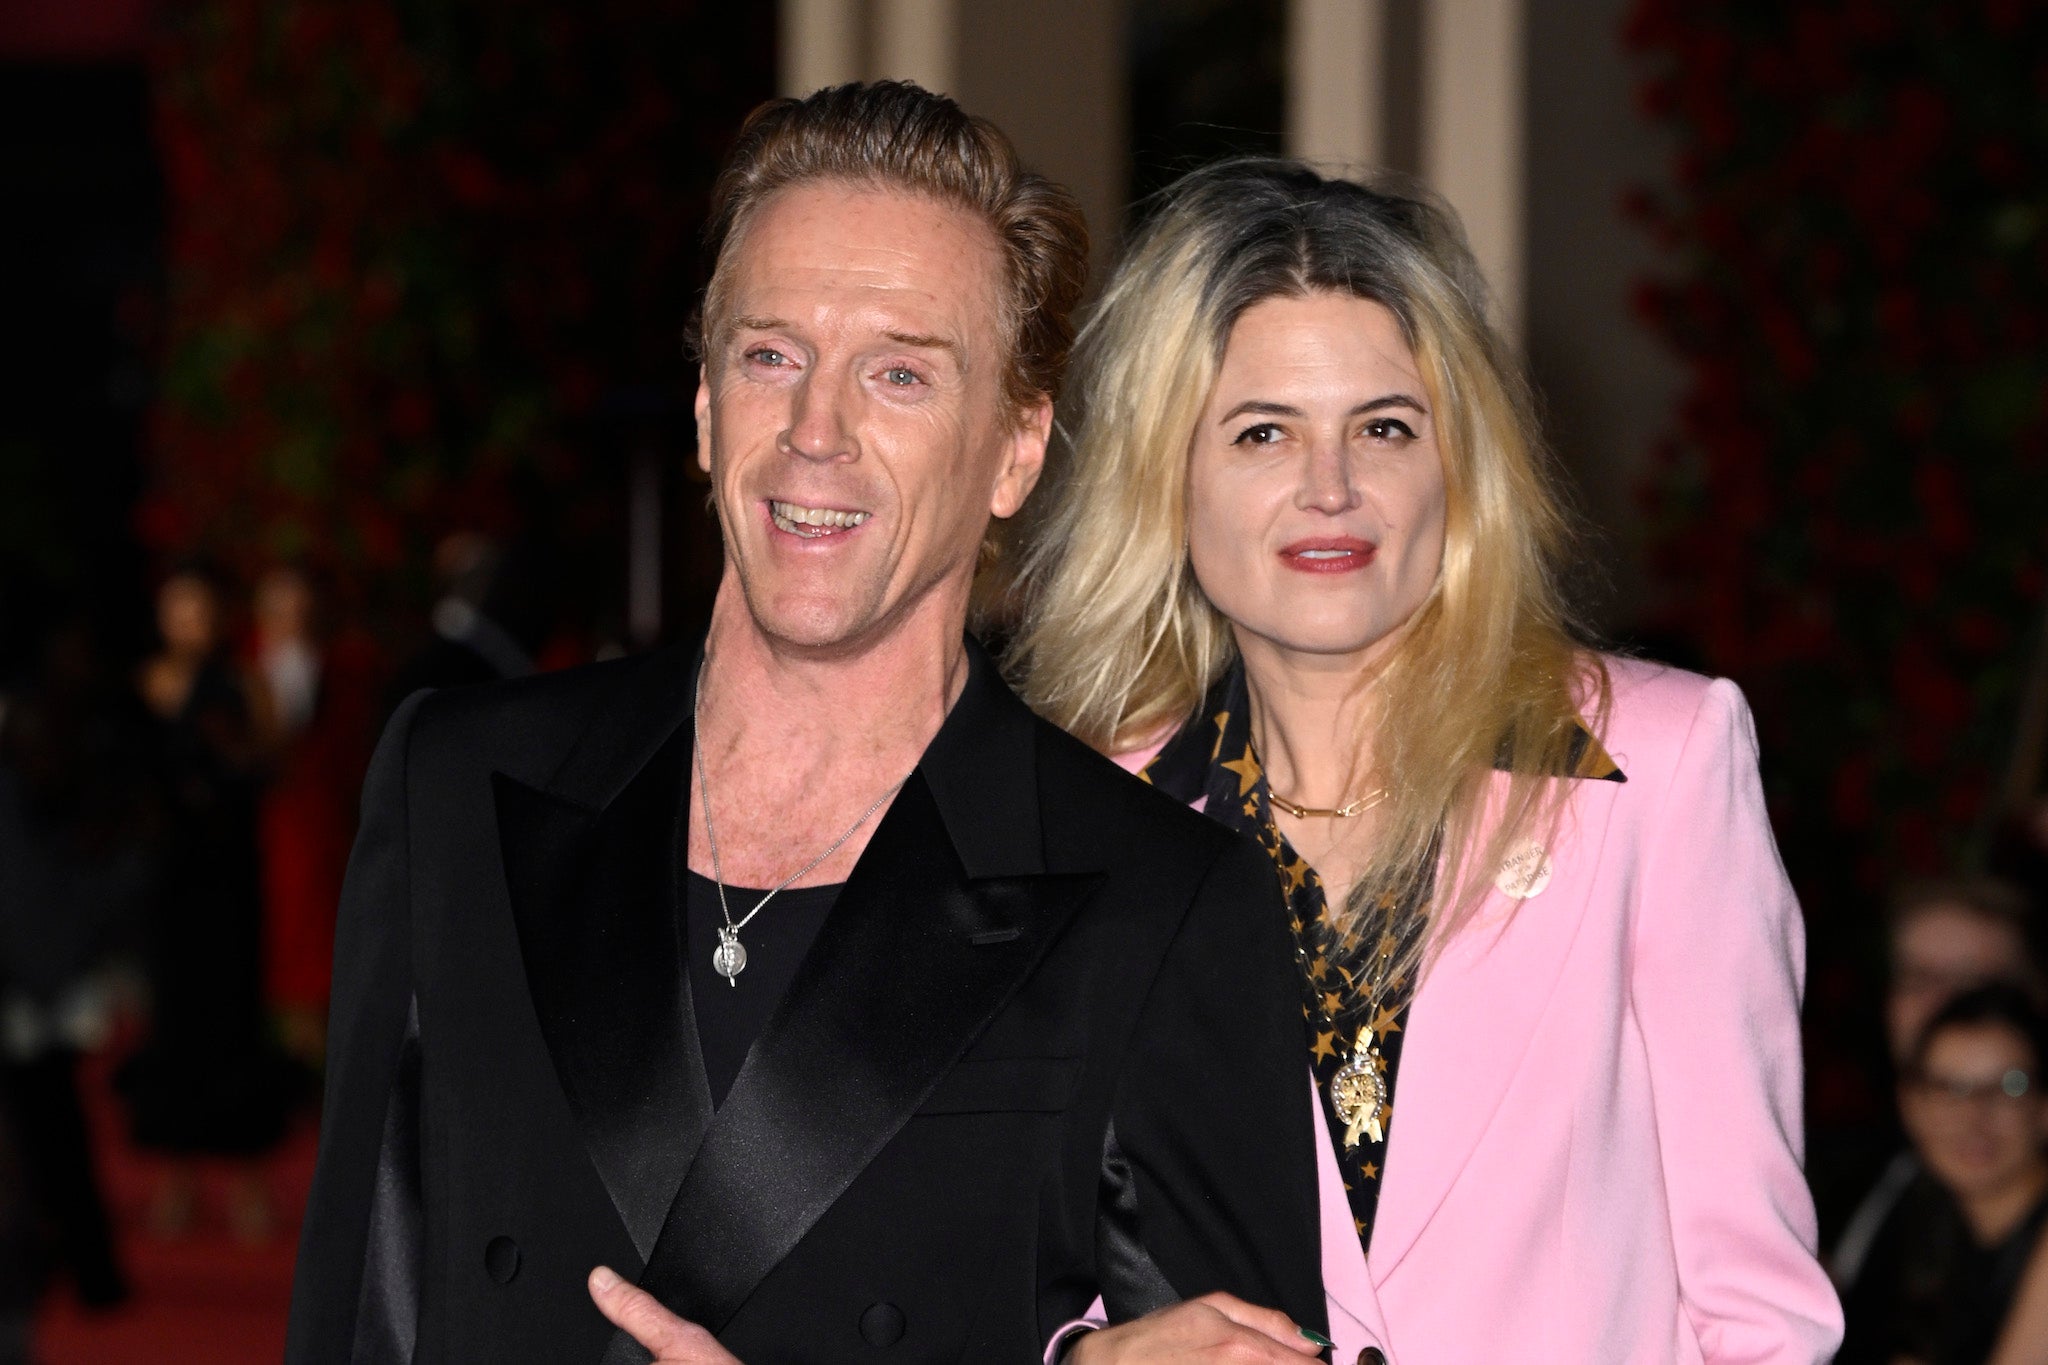 Damian Lewis and Mosshart attend Vogue World in London in September